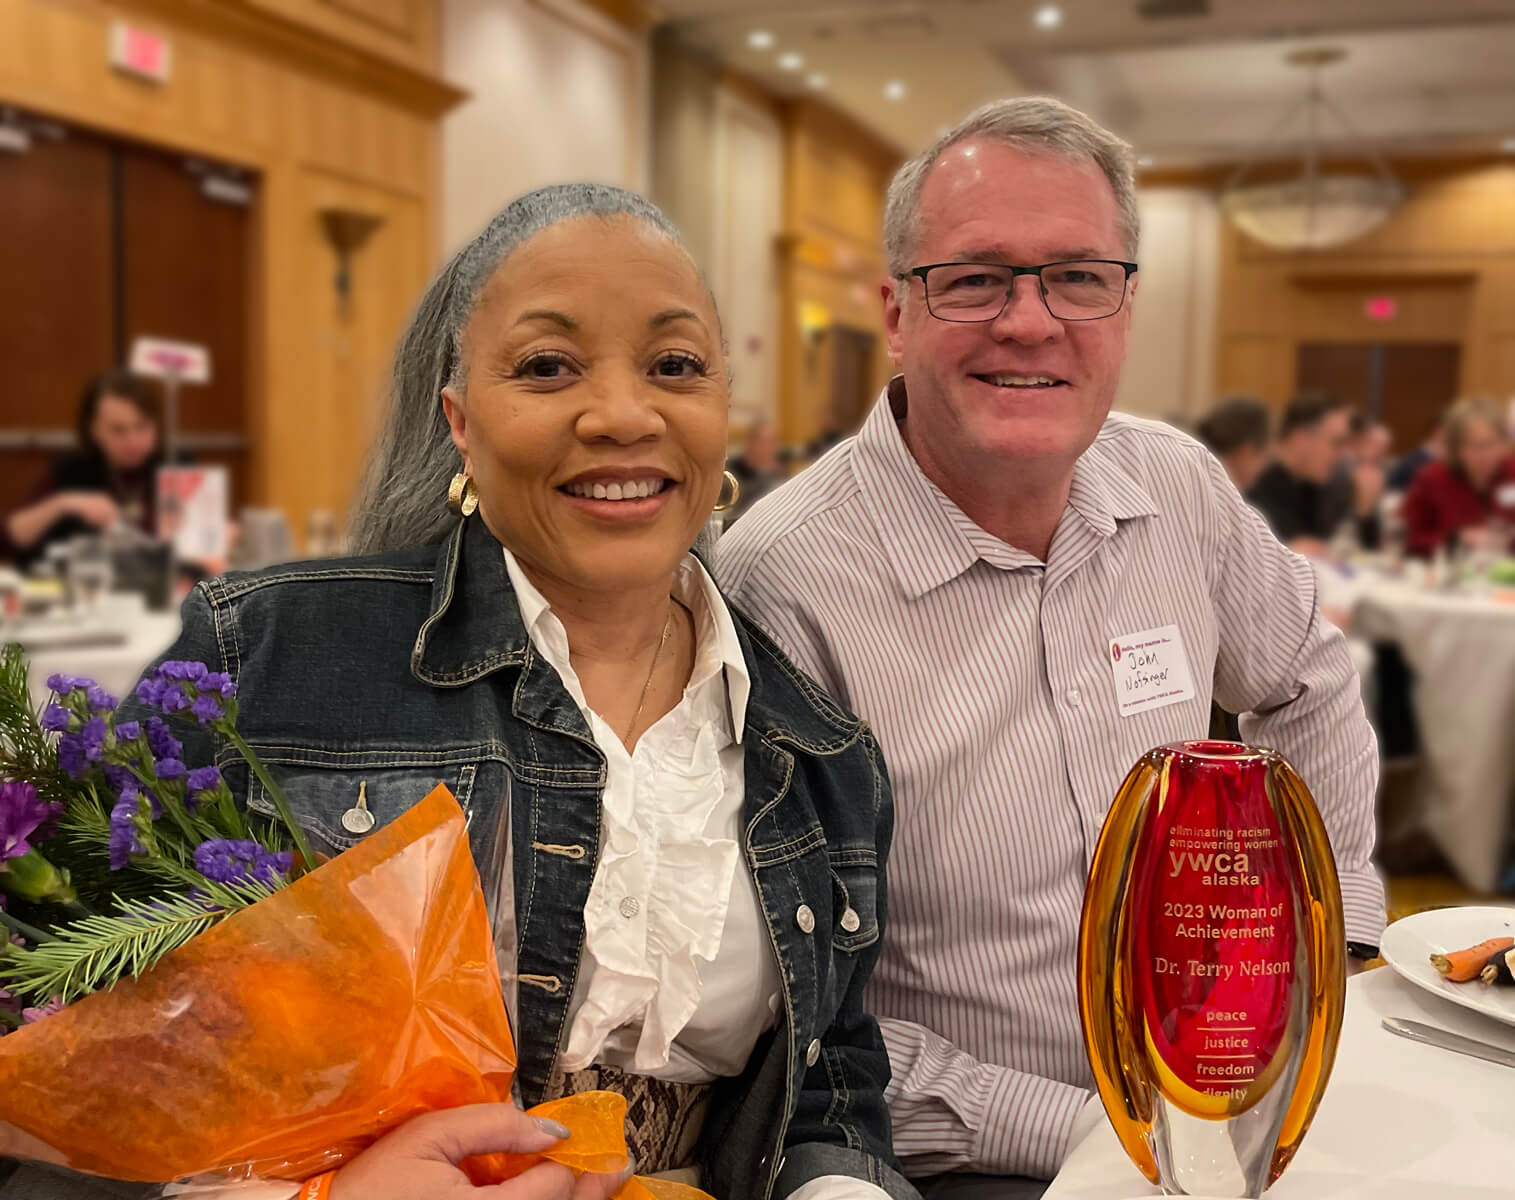 Dr. Terry Nelson, Associate Dean, and Dr. John Nofsinger, Dean, attend the December 12, 2023 YWCA Women of Achievement celebration where Dr. Nelson was honored.